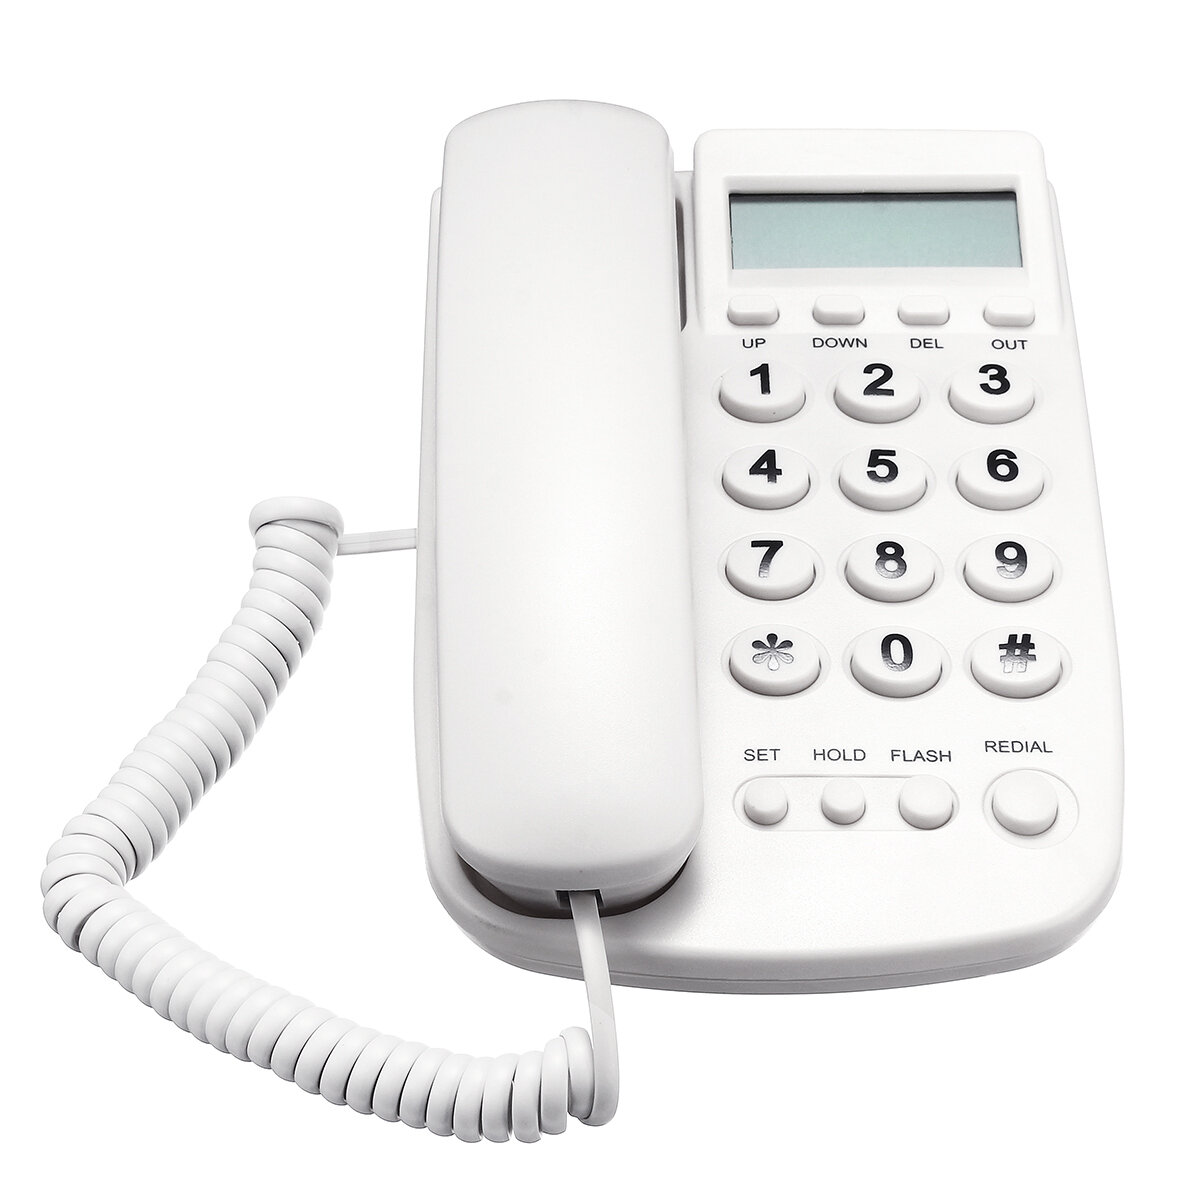 

Desktop Landline Phone Fixed Telephone FSK/DTMF Caller ID Corded Phone with LCD Screen for Home Office Hotels